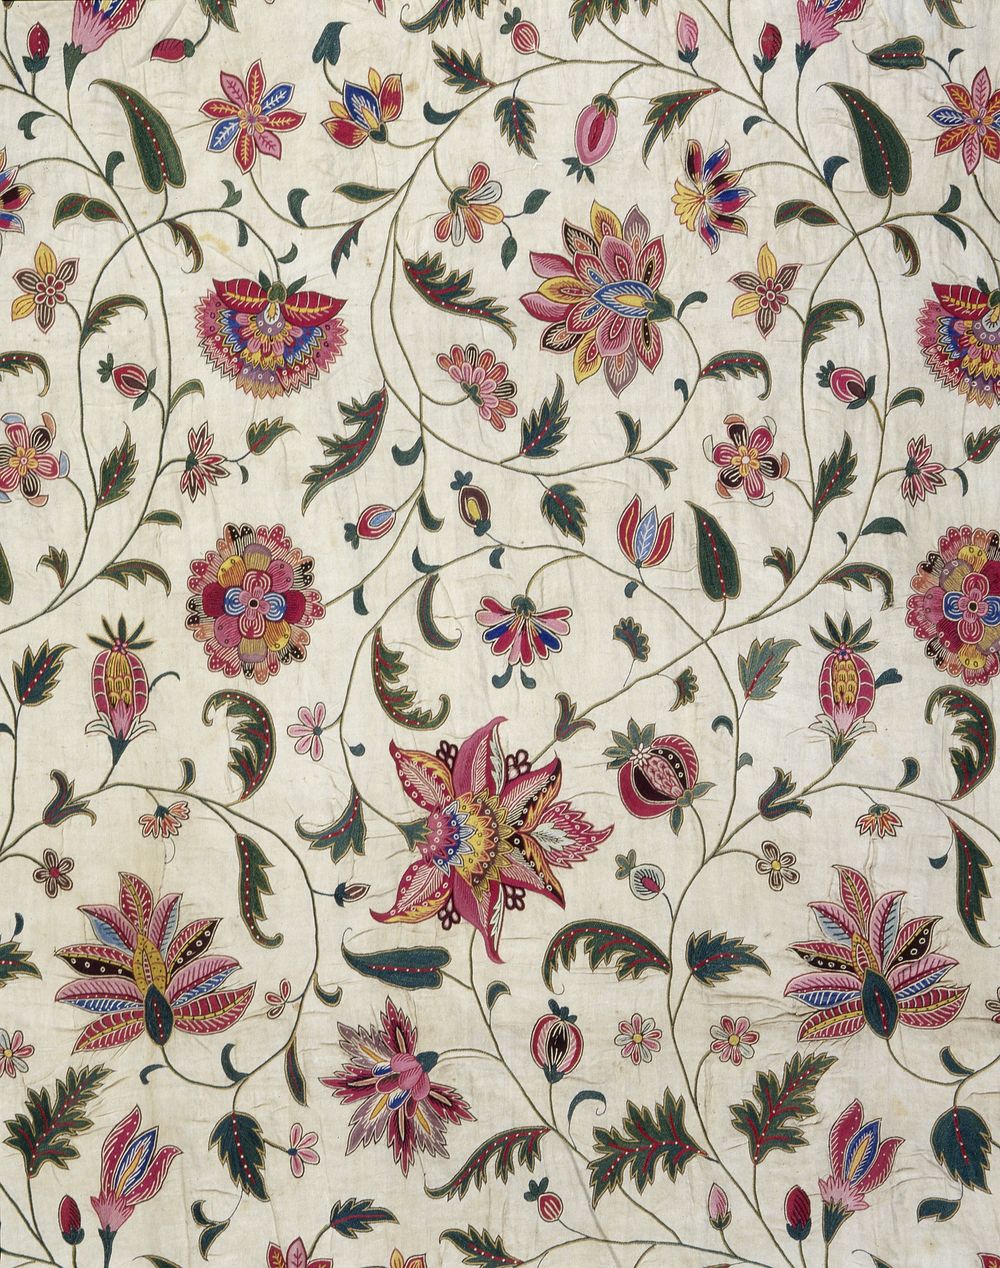 Fragment of an Embroidered Coverlet in Asian Fabric (c. 1720 - c. 1740) by anonymous